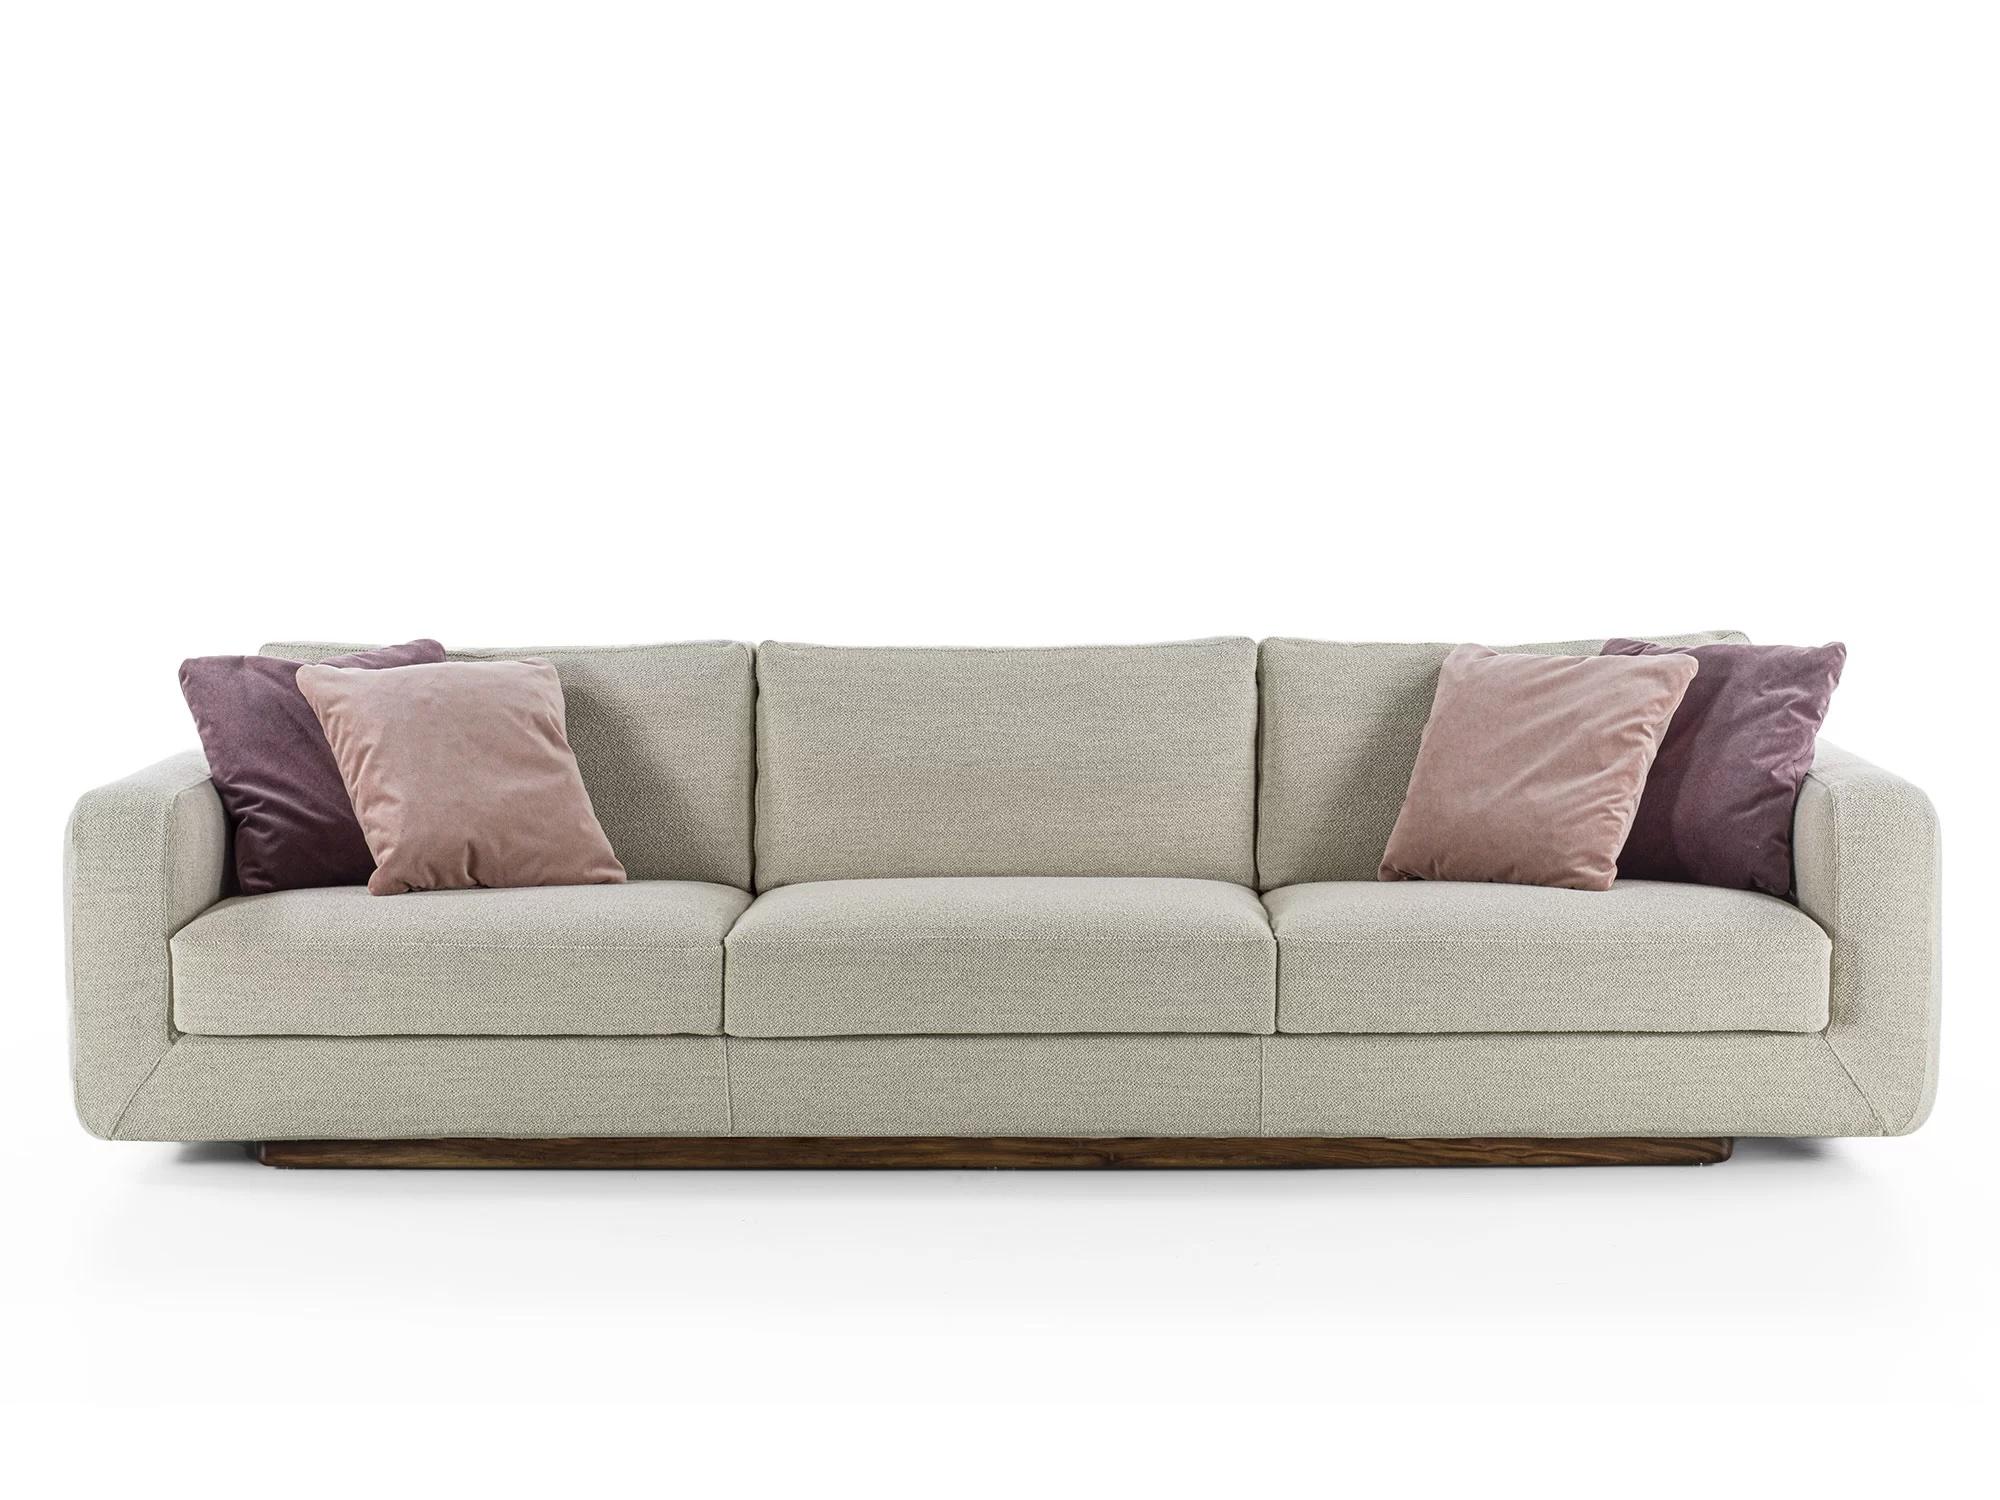 Sofa with a structure born from the union of two compenents characterized by soft, rounded lines: the solid wood base houses soft leather of fabric cushions with visible stitching.


